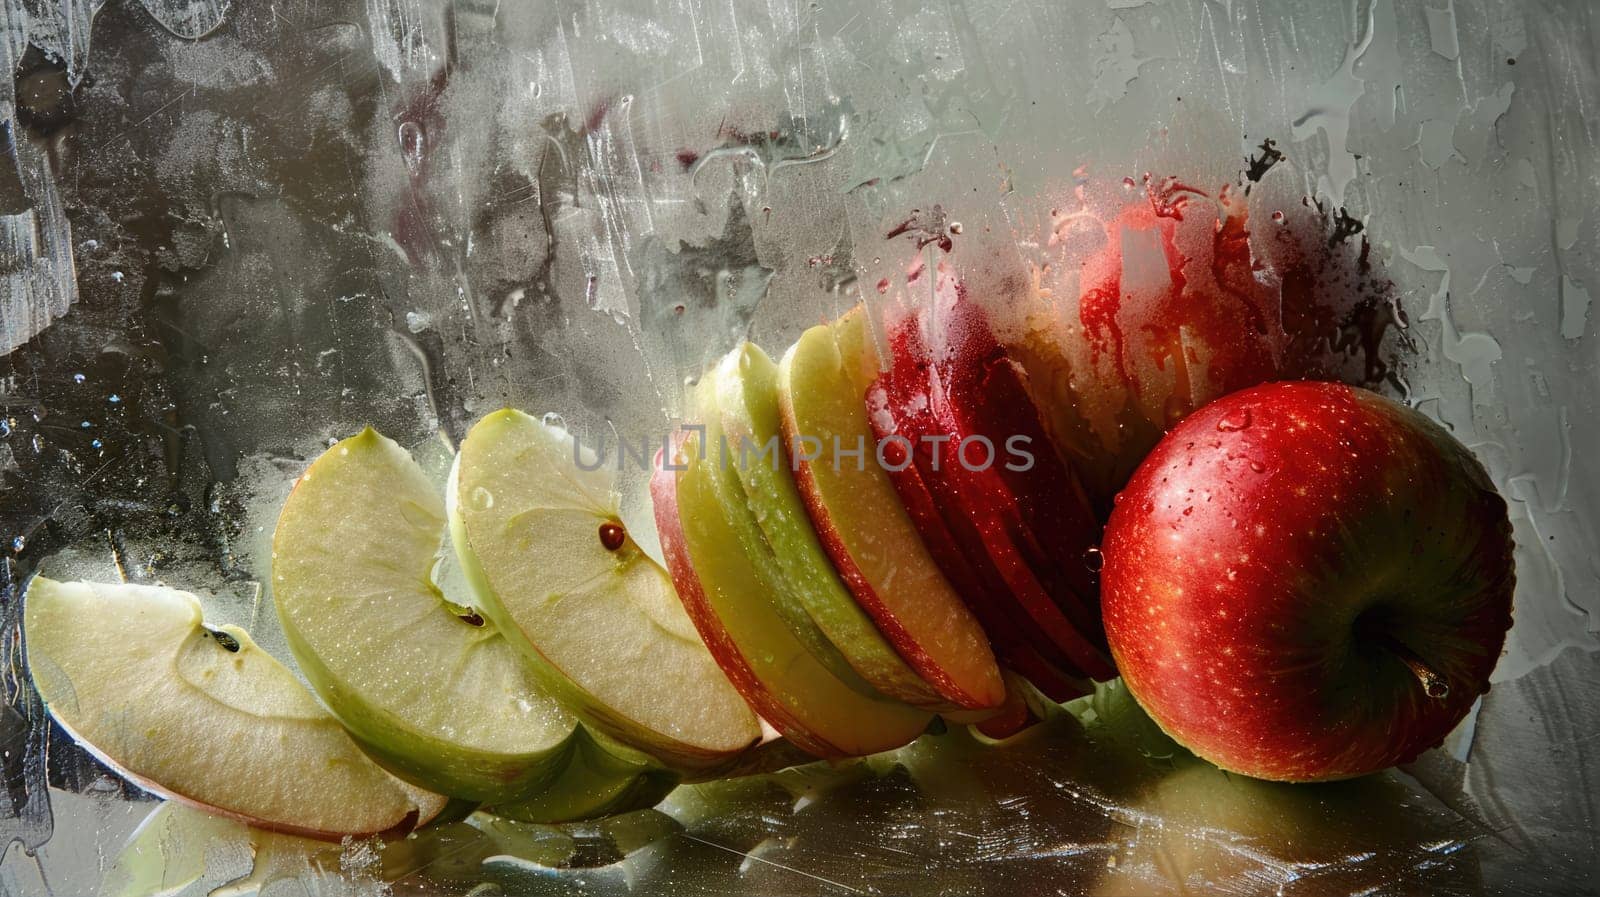 Sliced apple and whole apples on a textured gray background AI